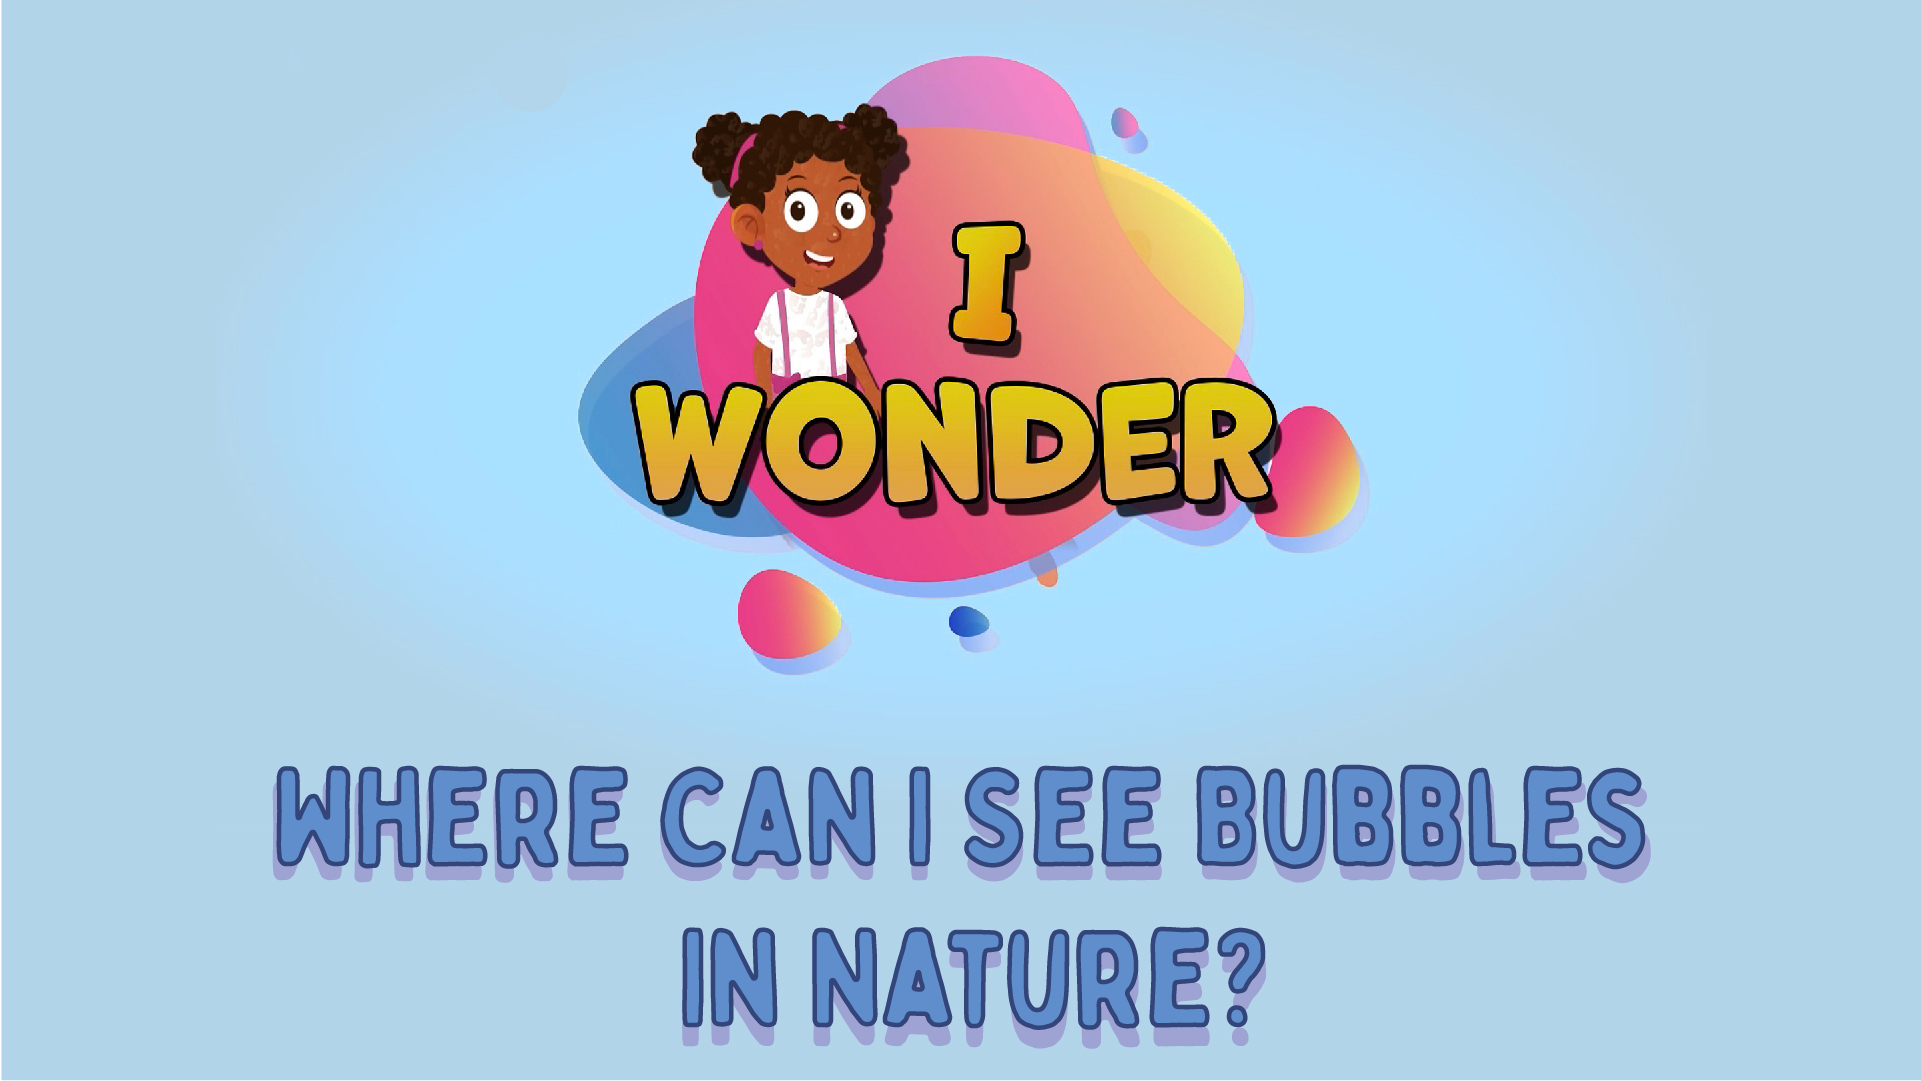 Where Can I See Bubbles In Nature?